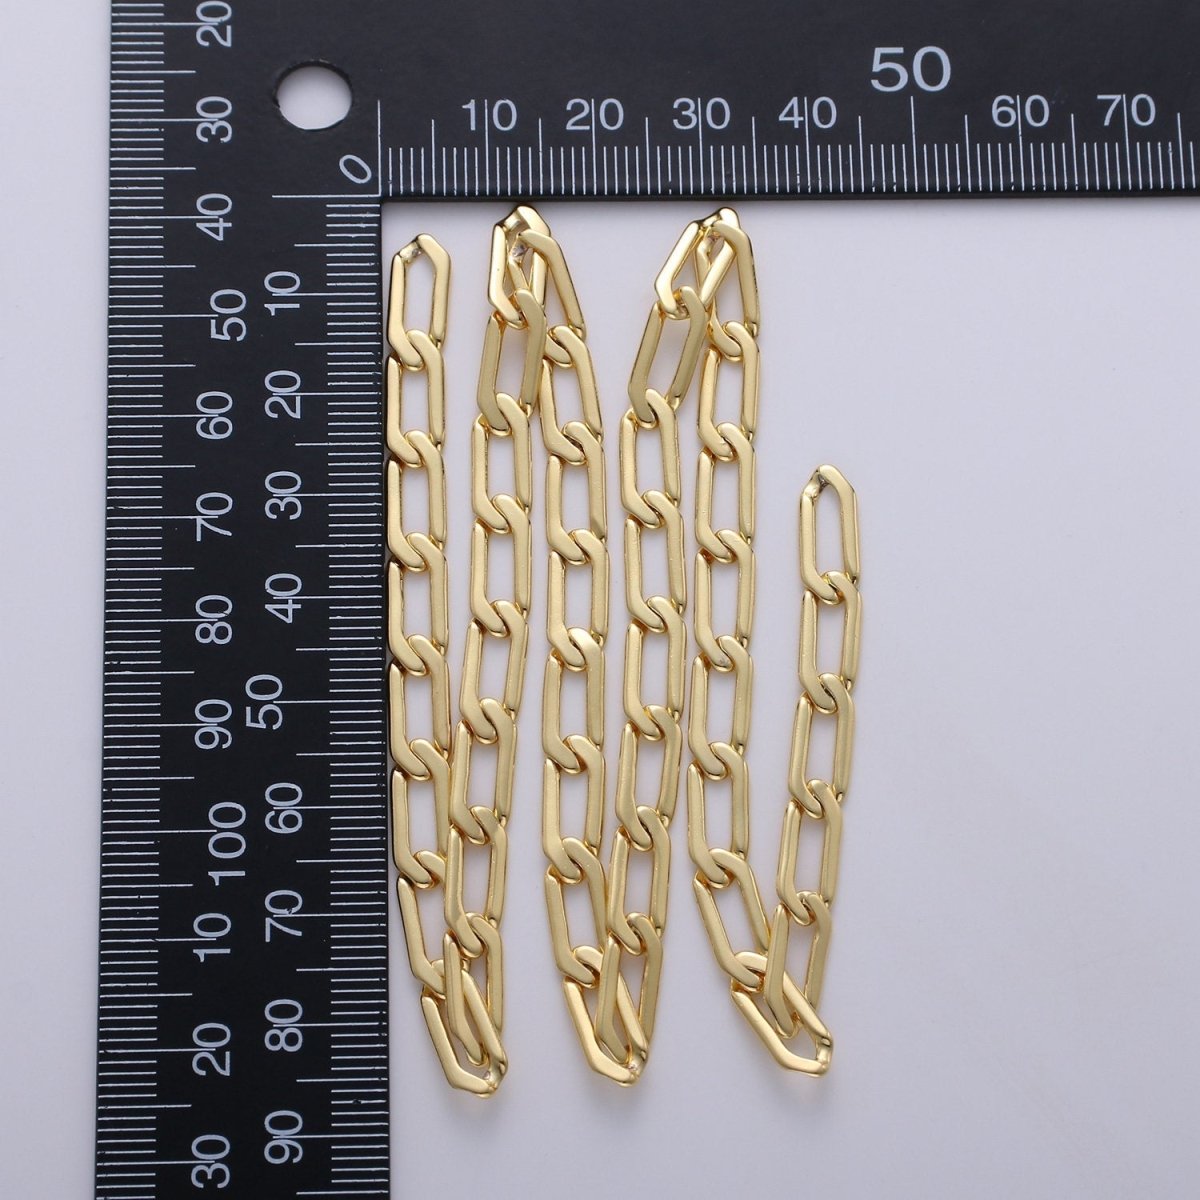 24K Gold Filled Paper Clip Curb Chain Necklace 1 yard 12x4mm, Paper Clip Gold Chain, Long Link unfinished | ROLL-238 - DLUXCA